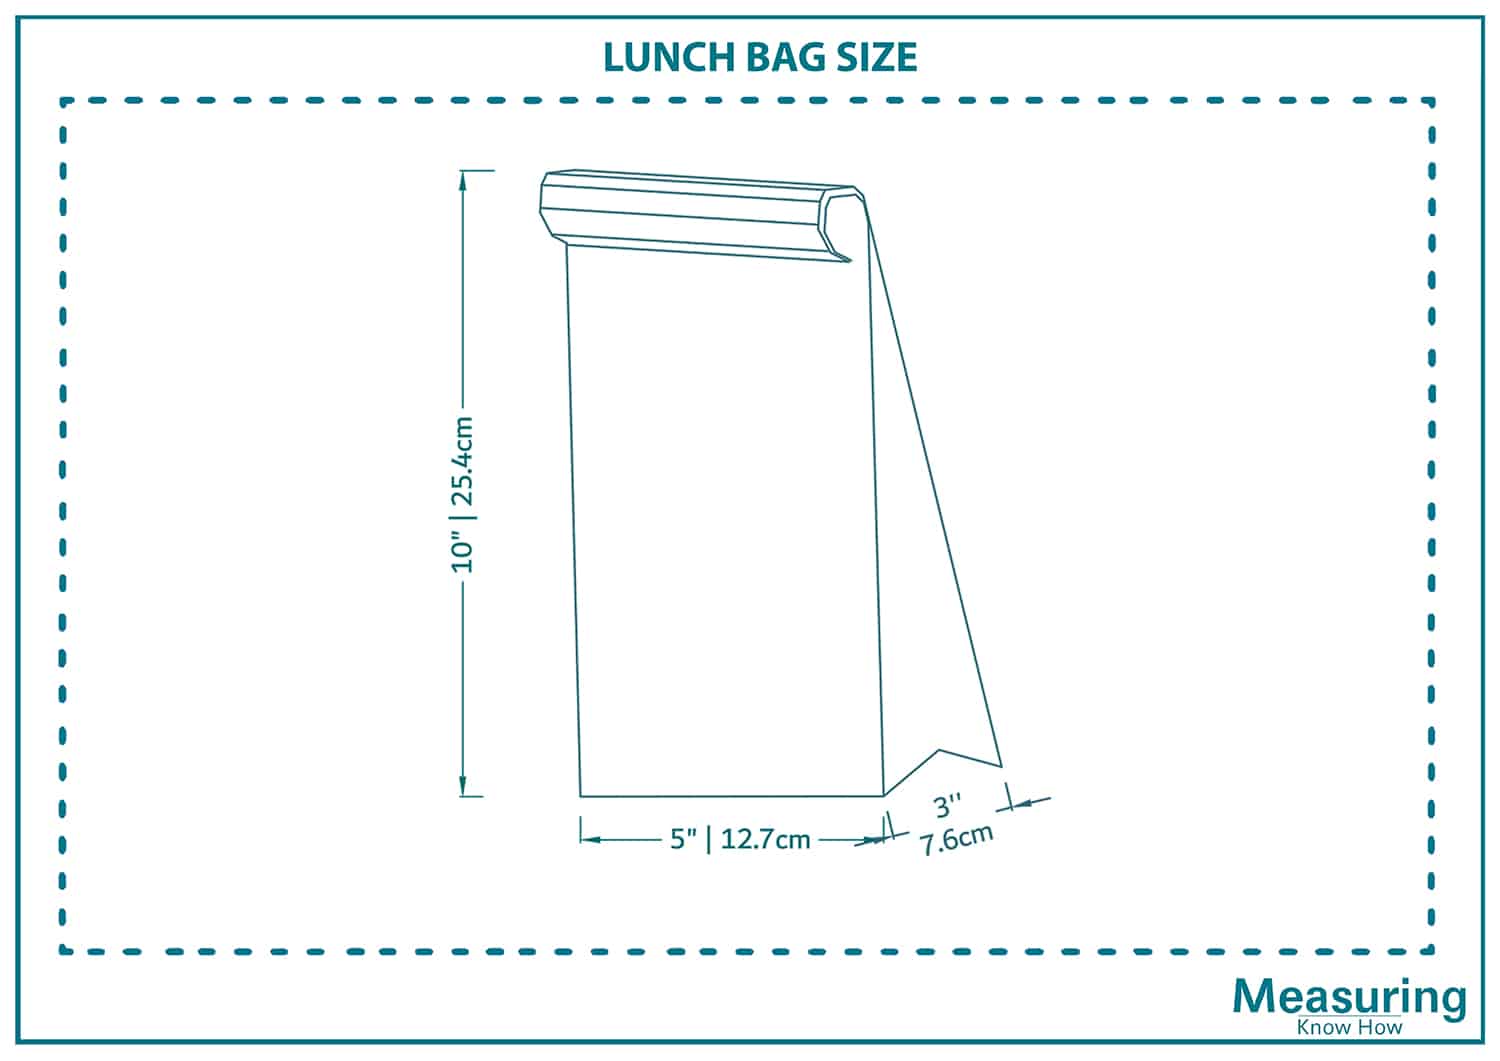 Typical Lunch bag size